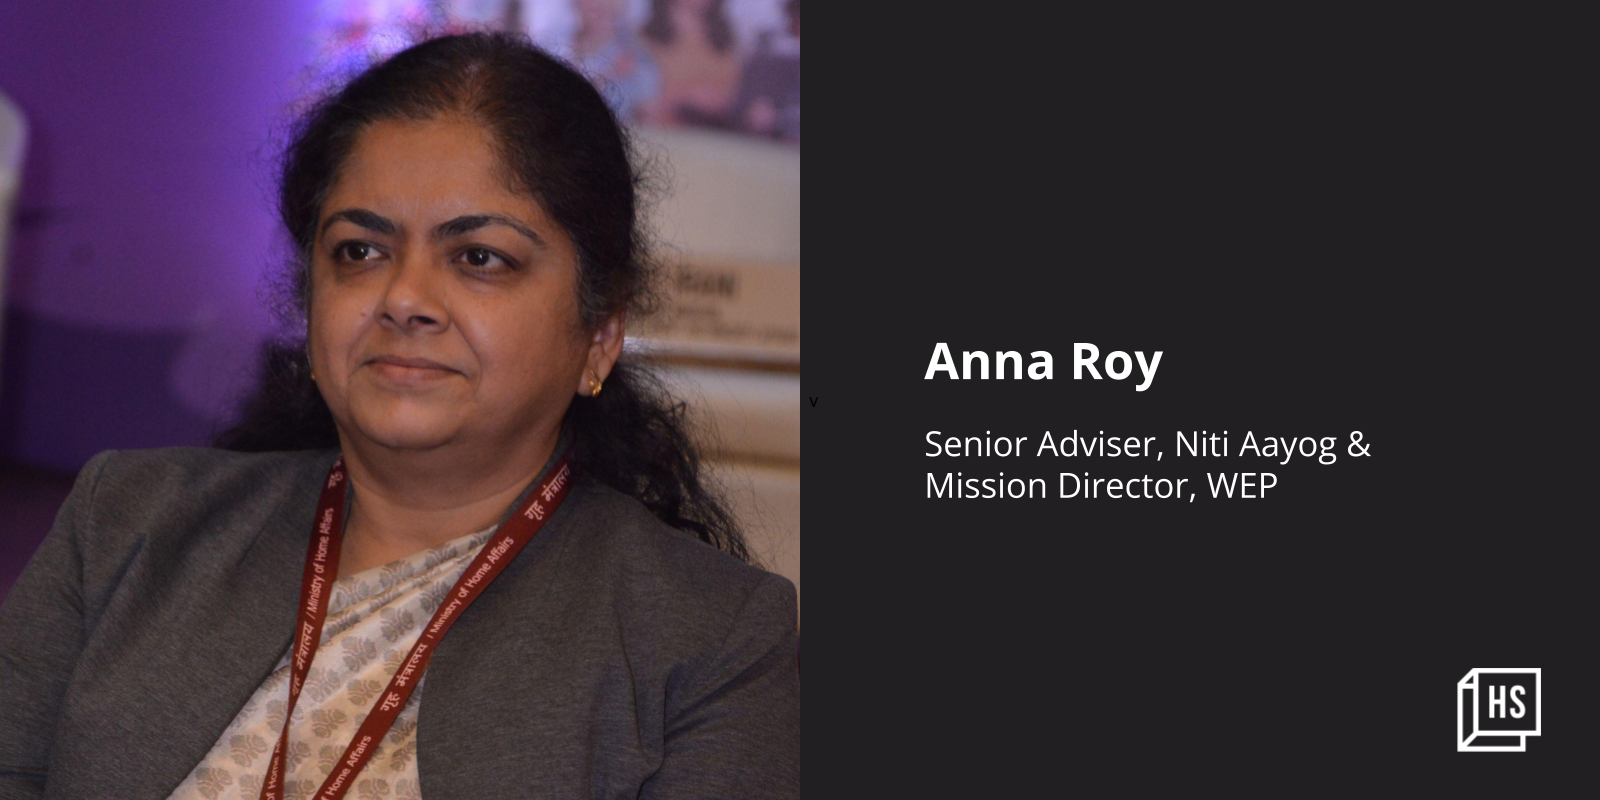 How NITI Aayog’s WEP is enabling women entrepreneurs to scale with right content, information

